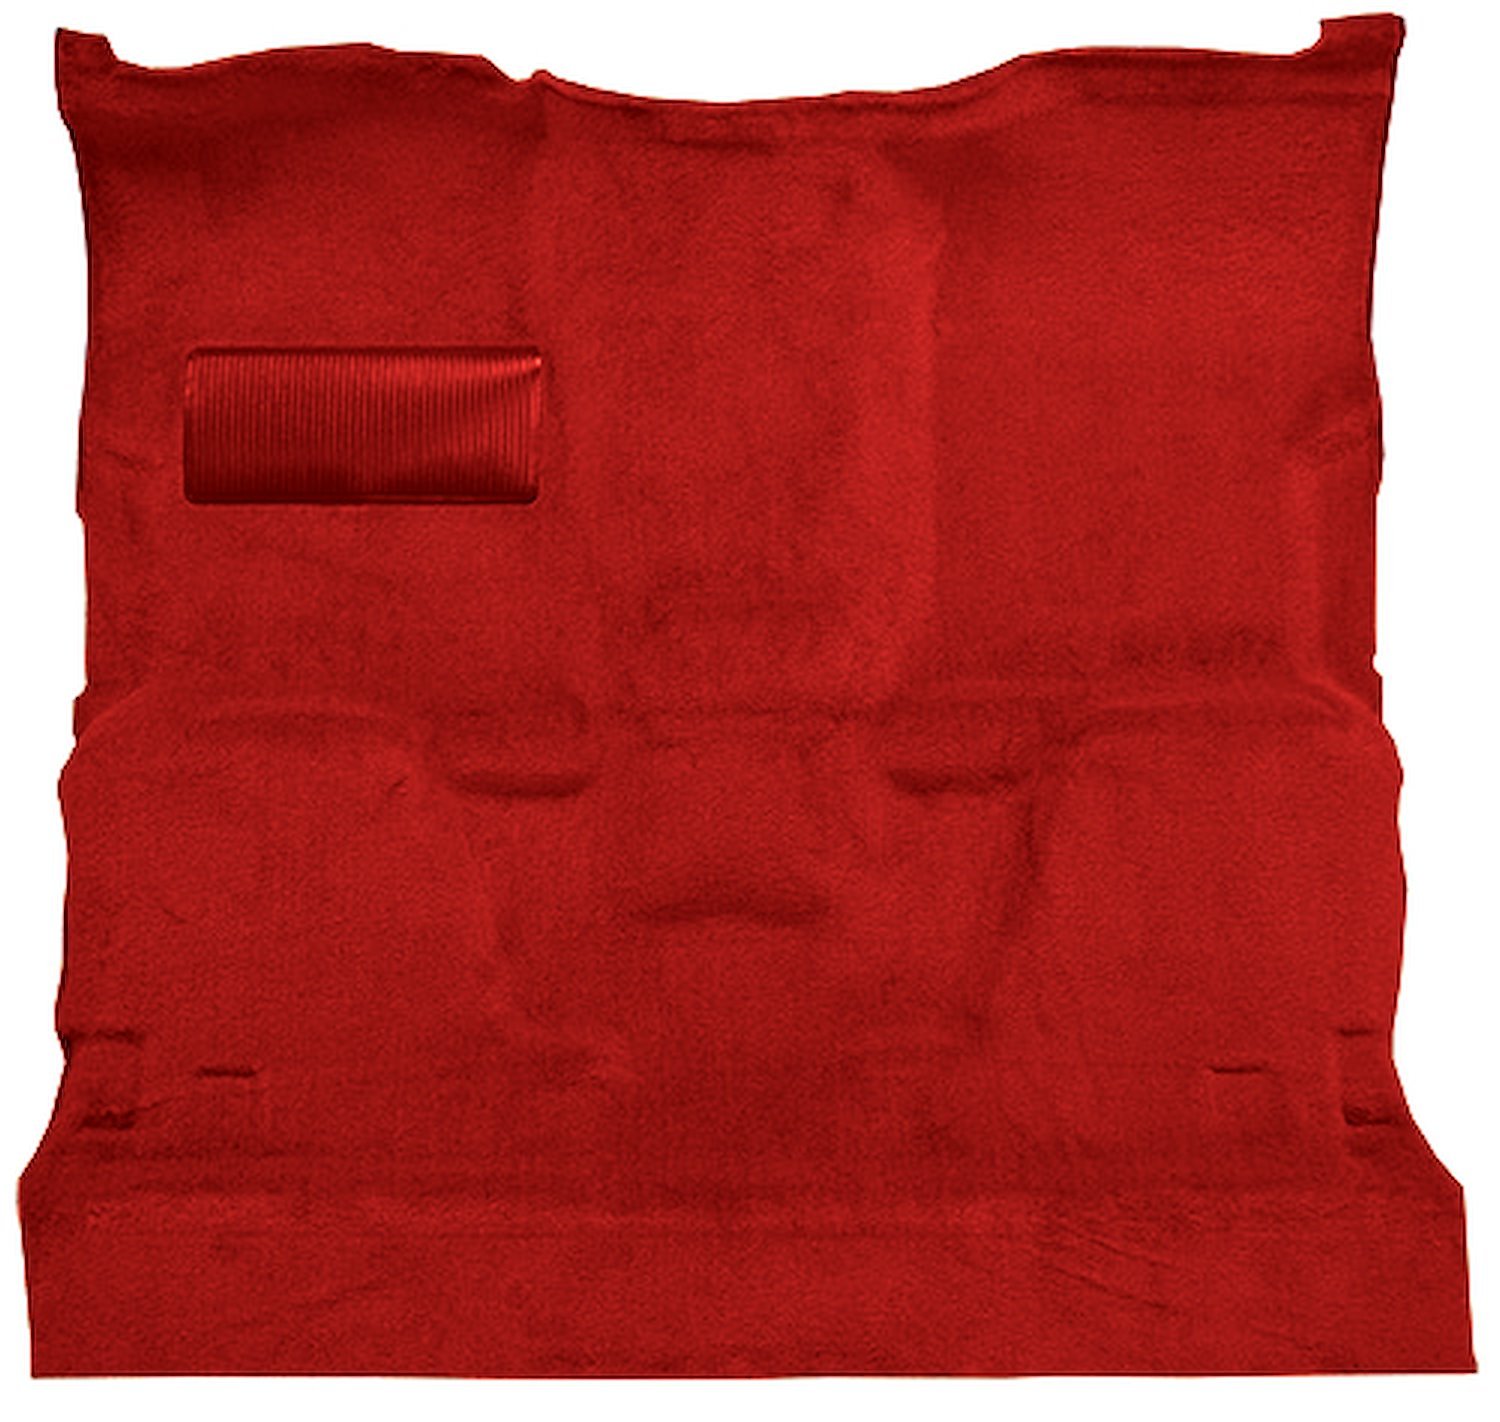 Molded Cut Pile Carpet for 1981-1986 GM C Series Regular Cab Trucks w/Automatic or 3-Speed [Jute Backing, Dark Red/Carmine]